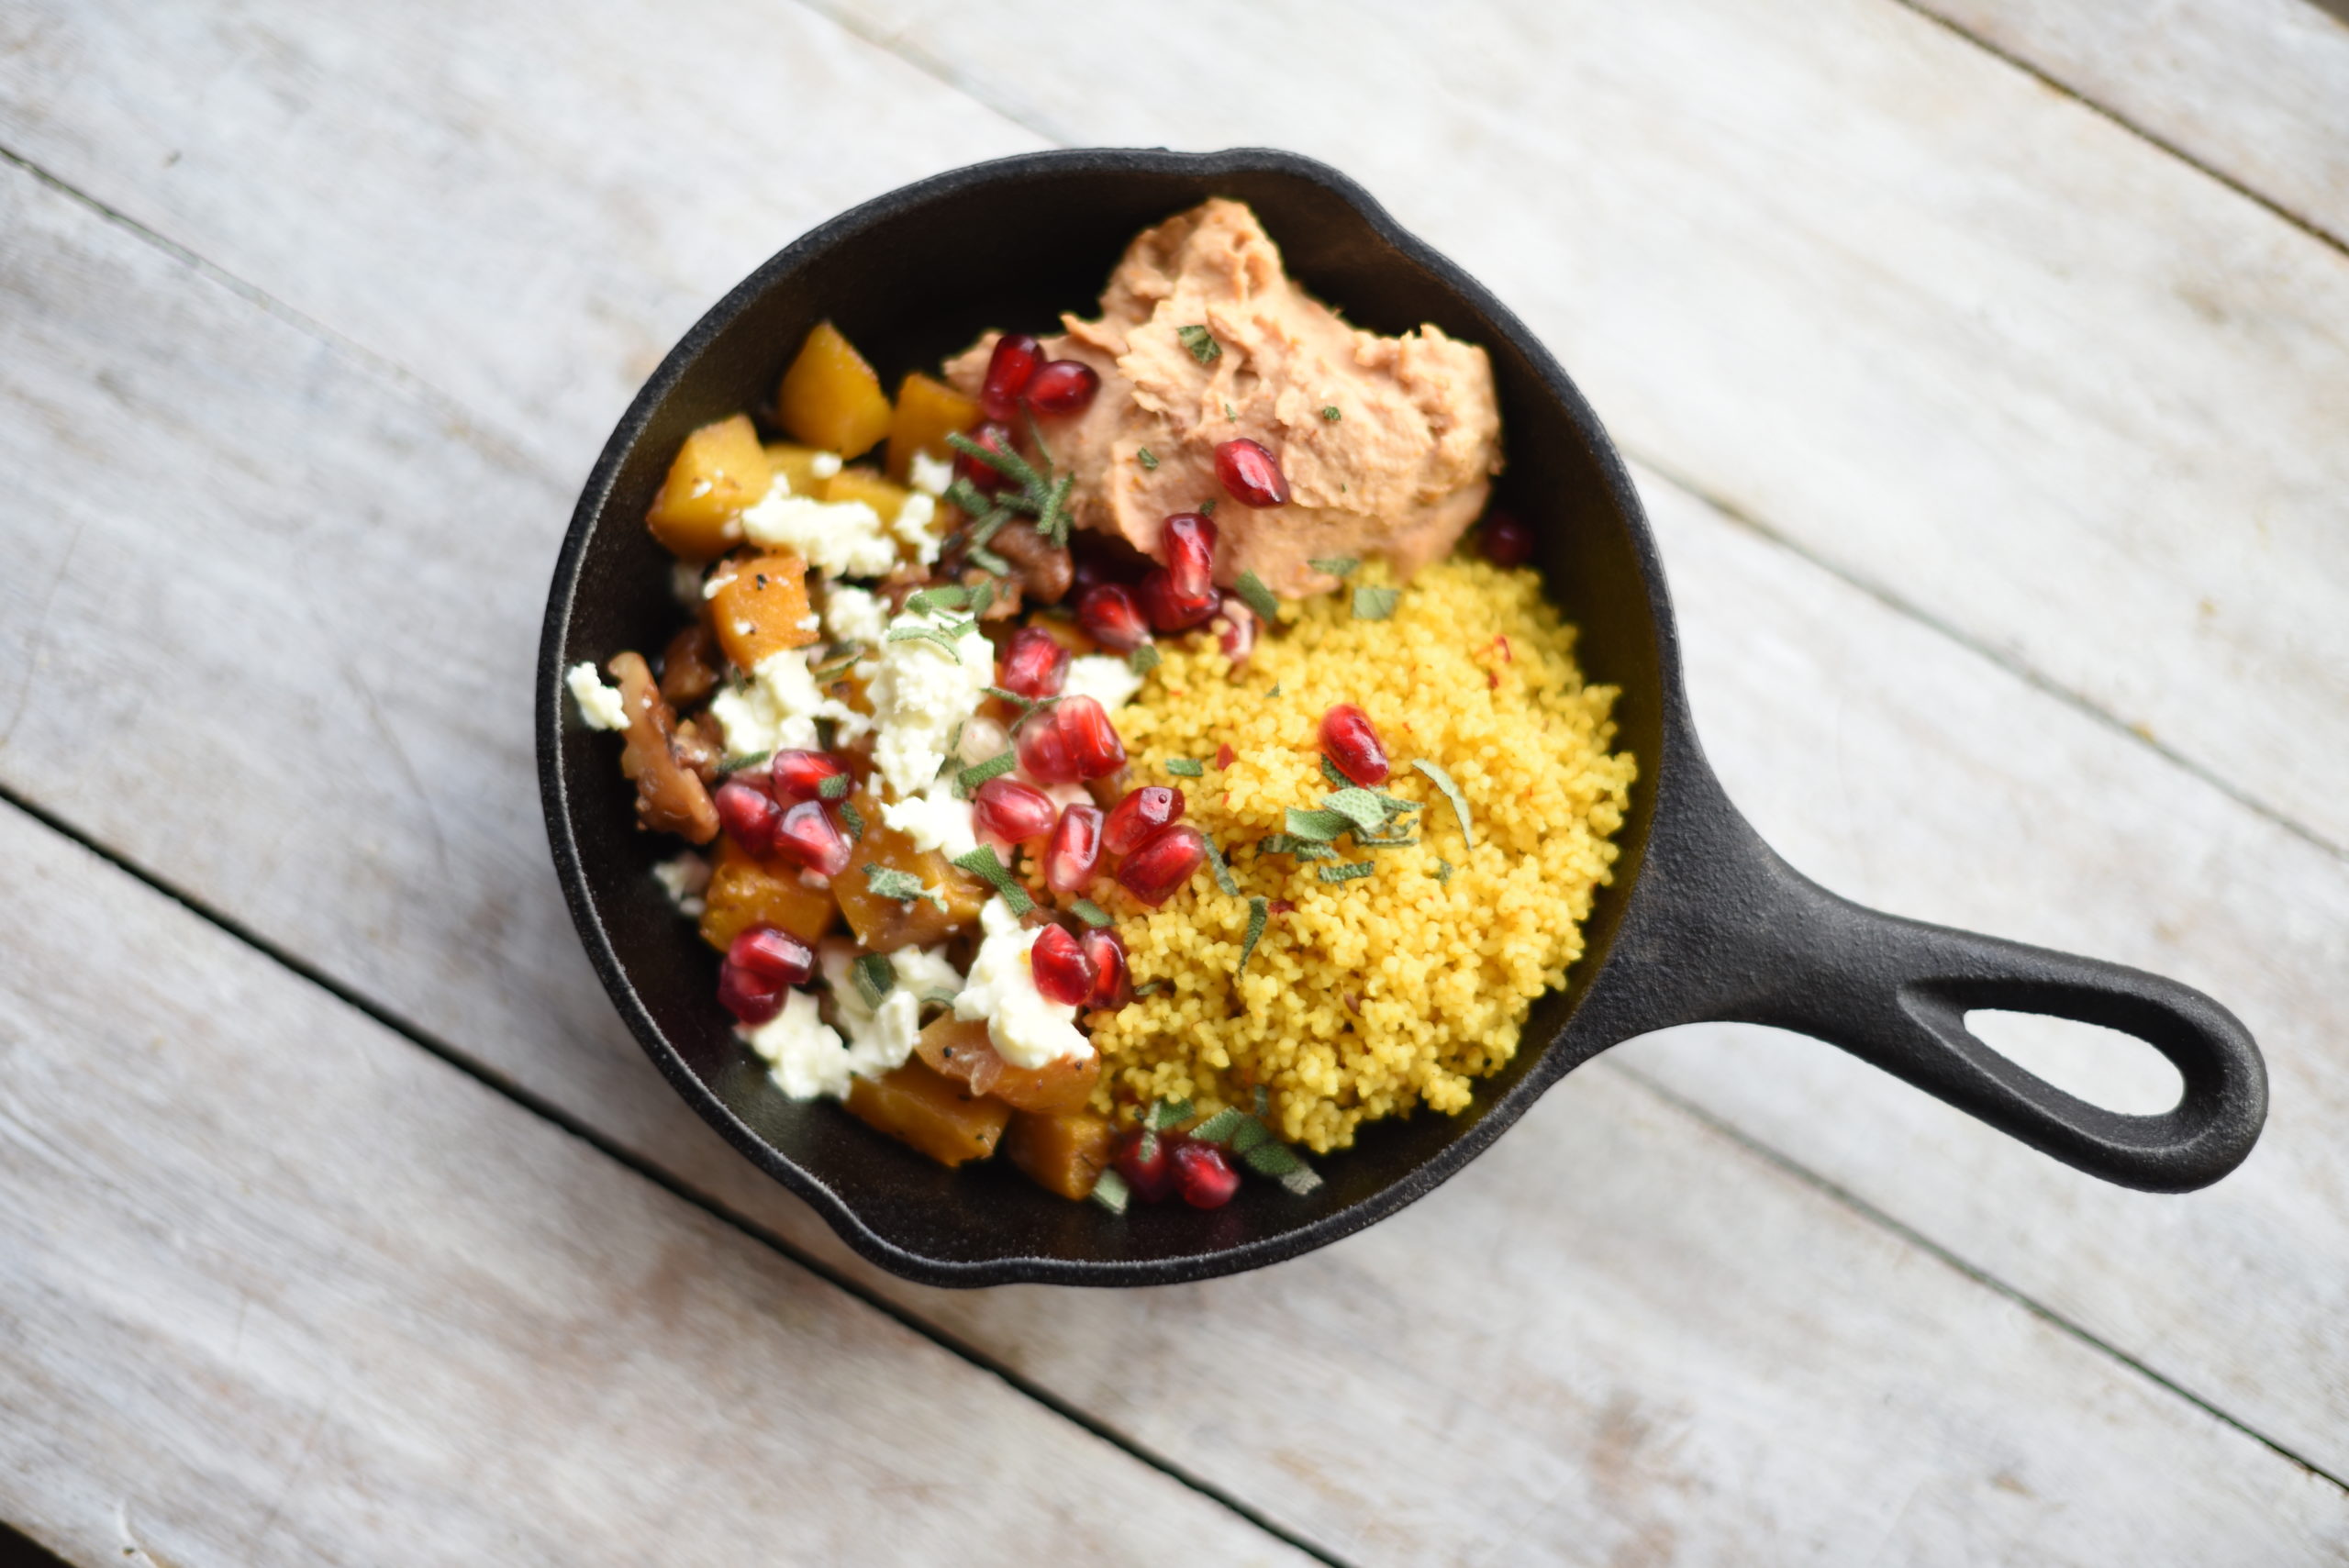 Roasted butternut squash with aromatic couscous and white bean hummus